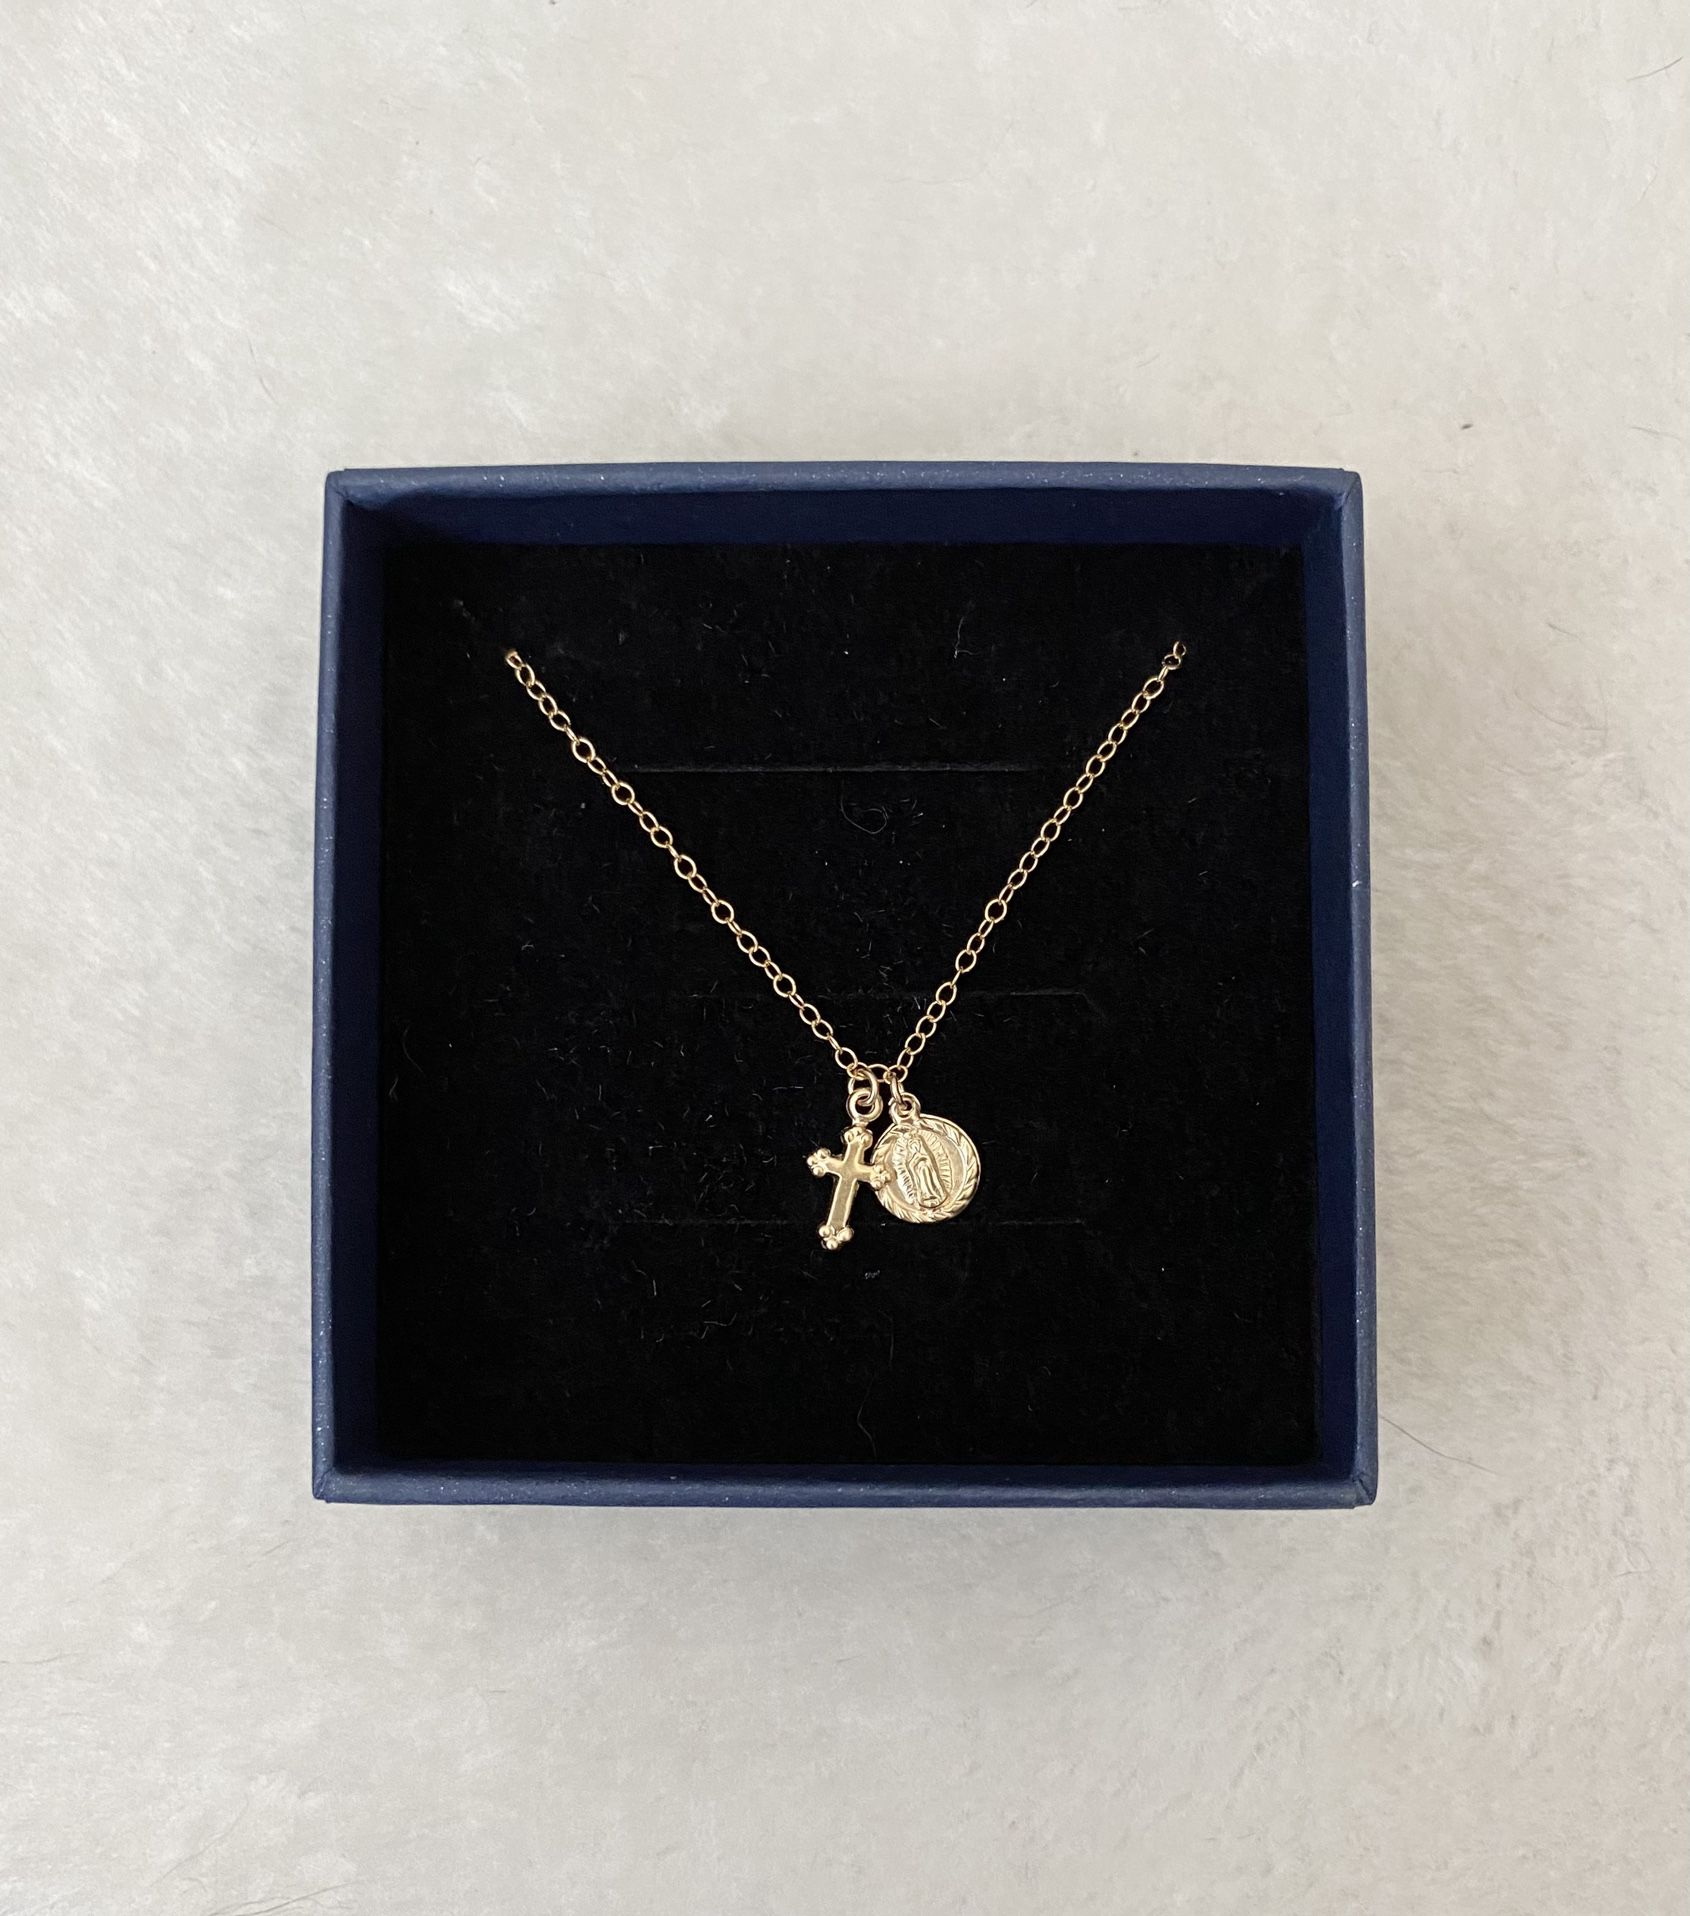 NEW Cross & Saint 14k Gold Filled Charm Necklace